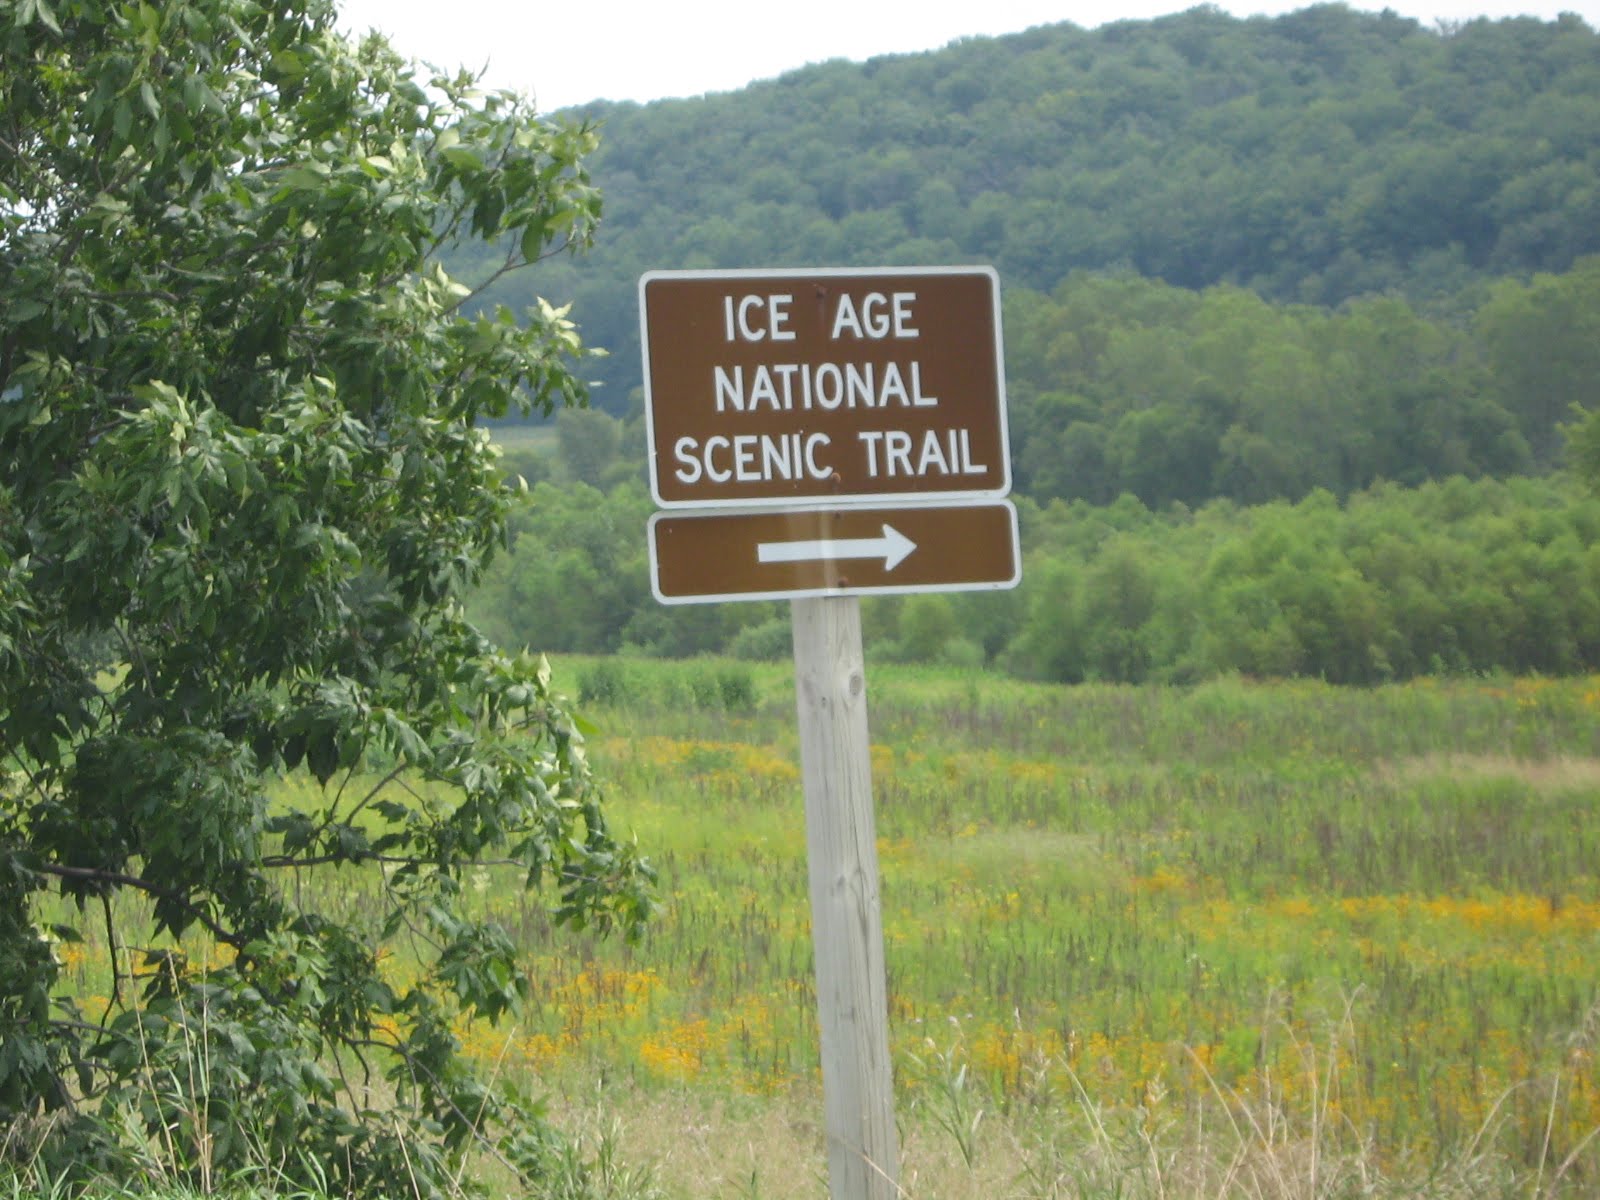 The Ice Age Trail